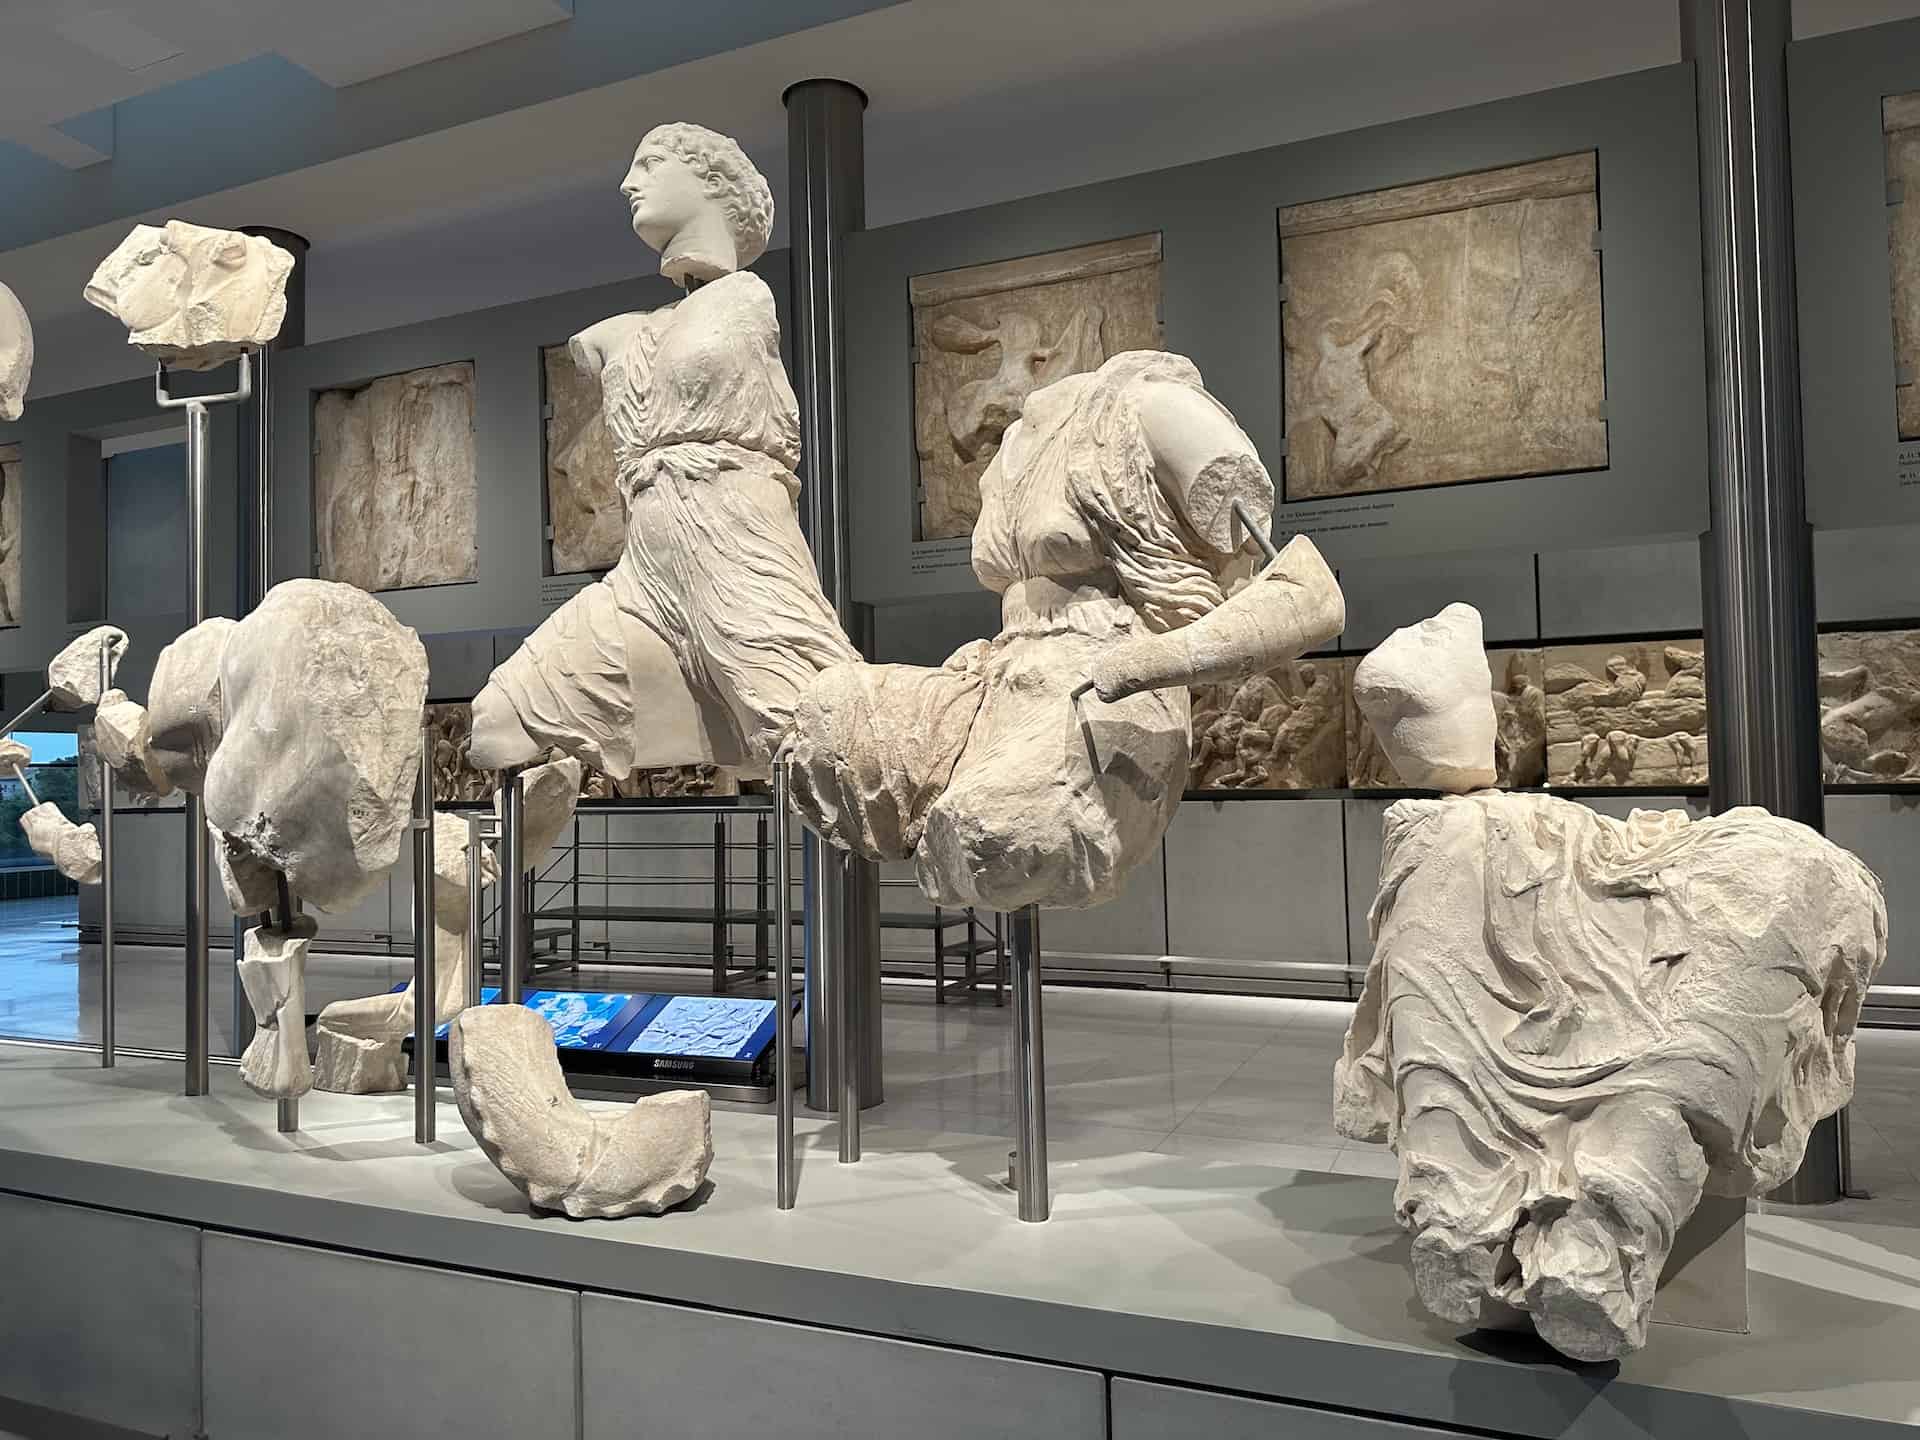 Iris (left), Amphitrite (center), Boy (upper right), and Heroine (Oreithyia) (lower right) on the west pediment of the Parthenon at the Acropolis Museum in Athens, Greece